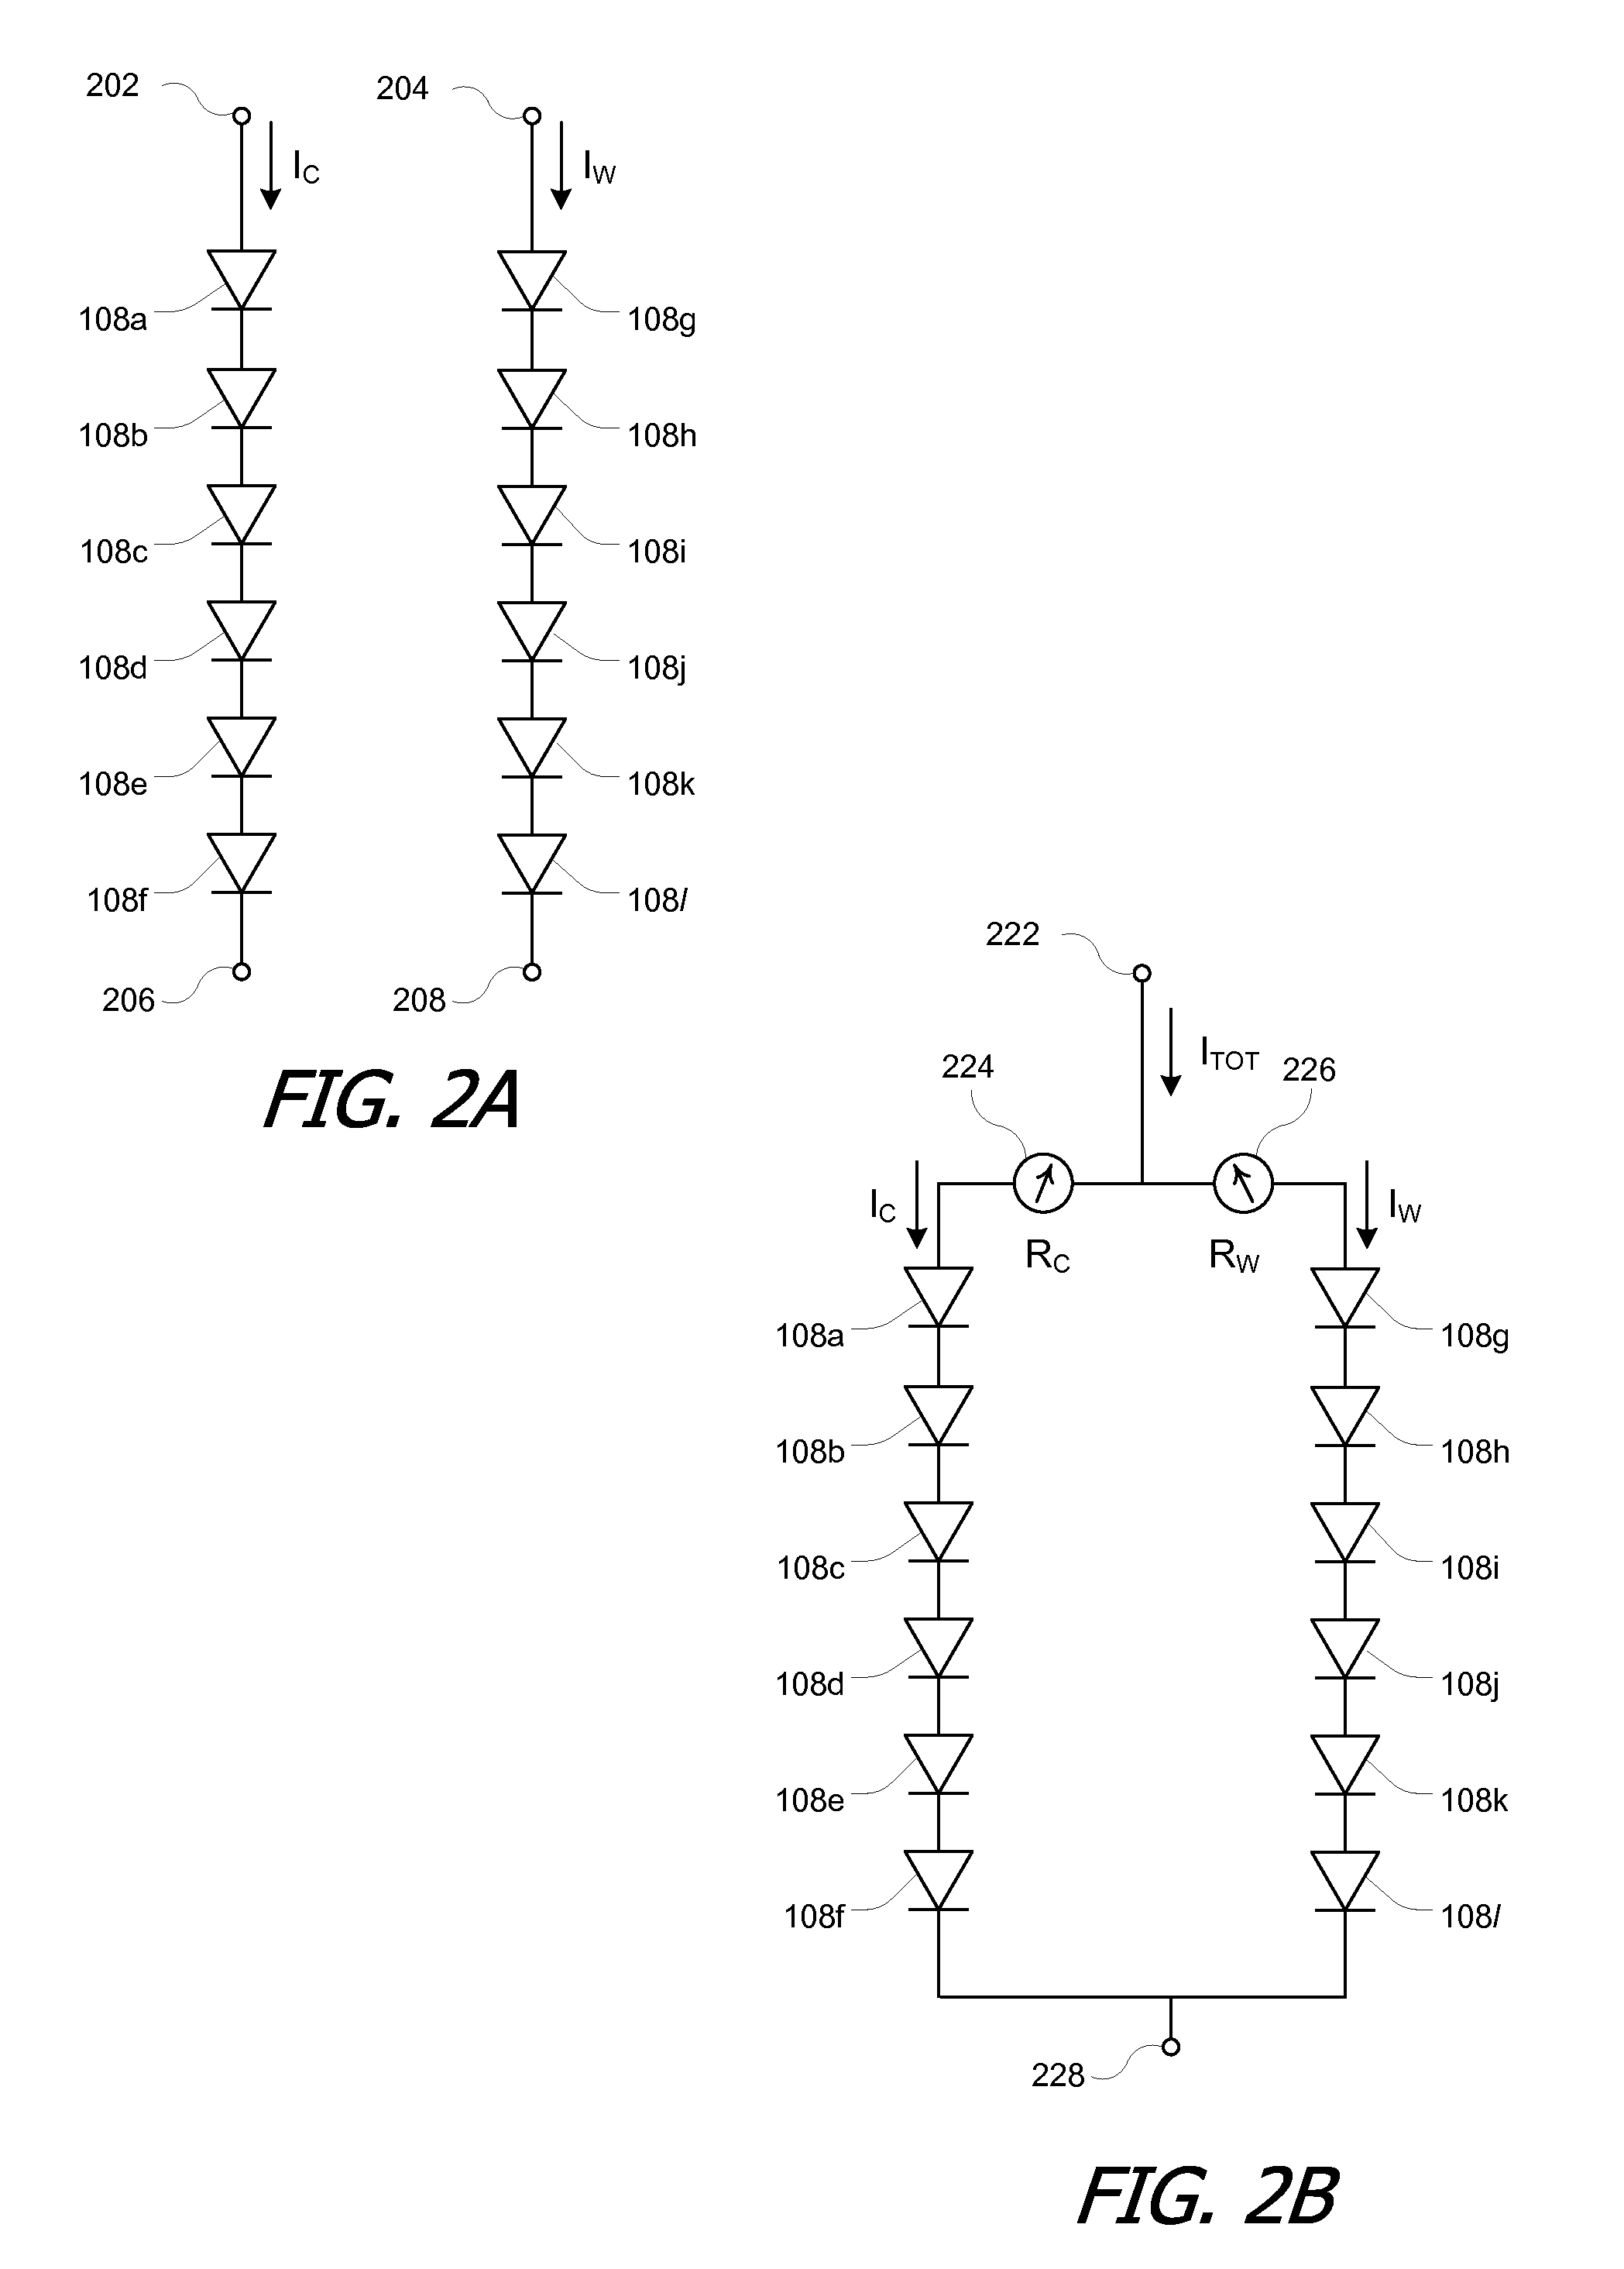 Apparatus for tuning of emitter with multiple leds to a single color bin